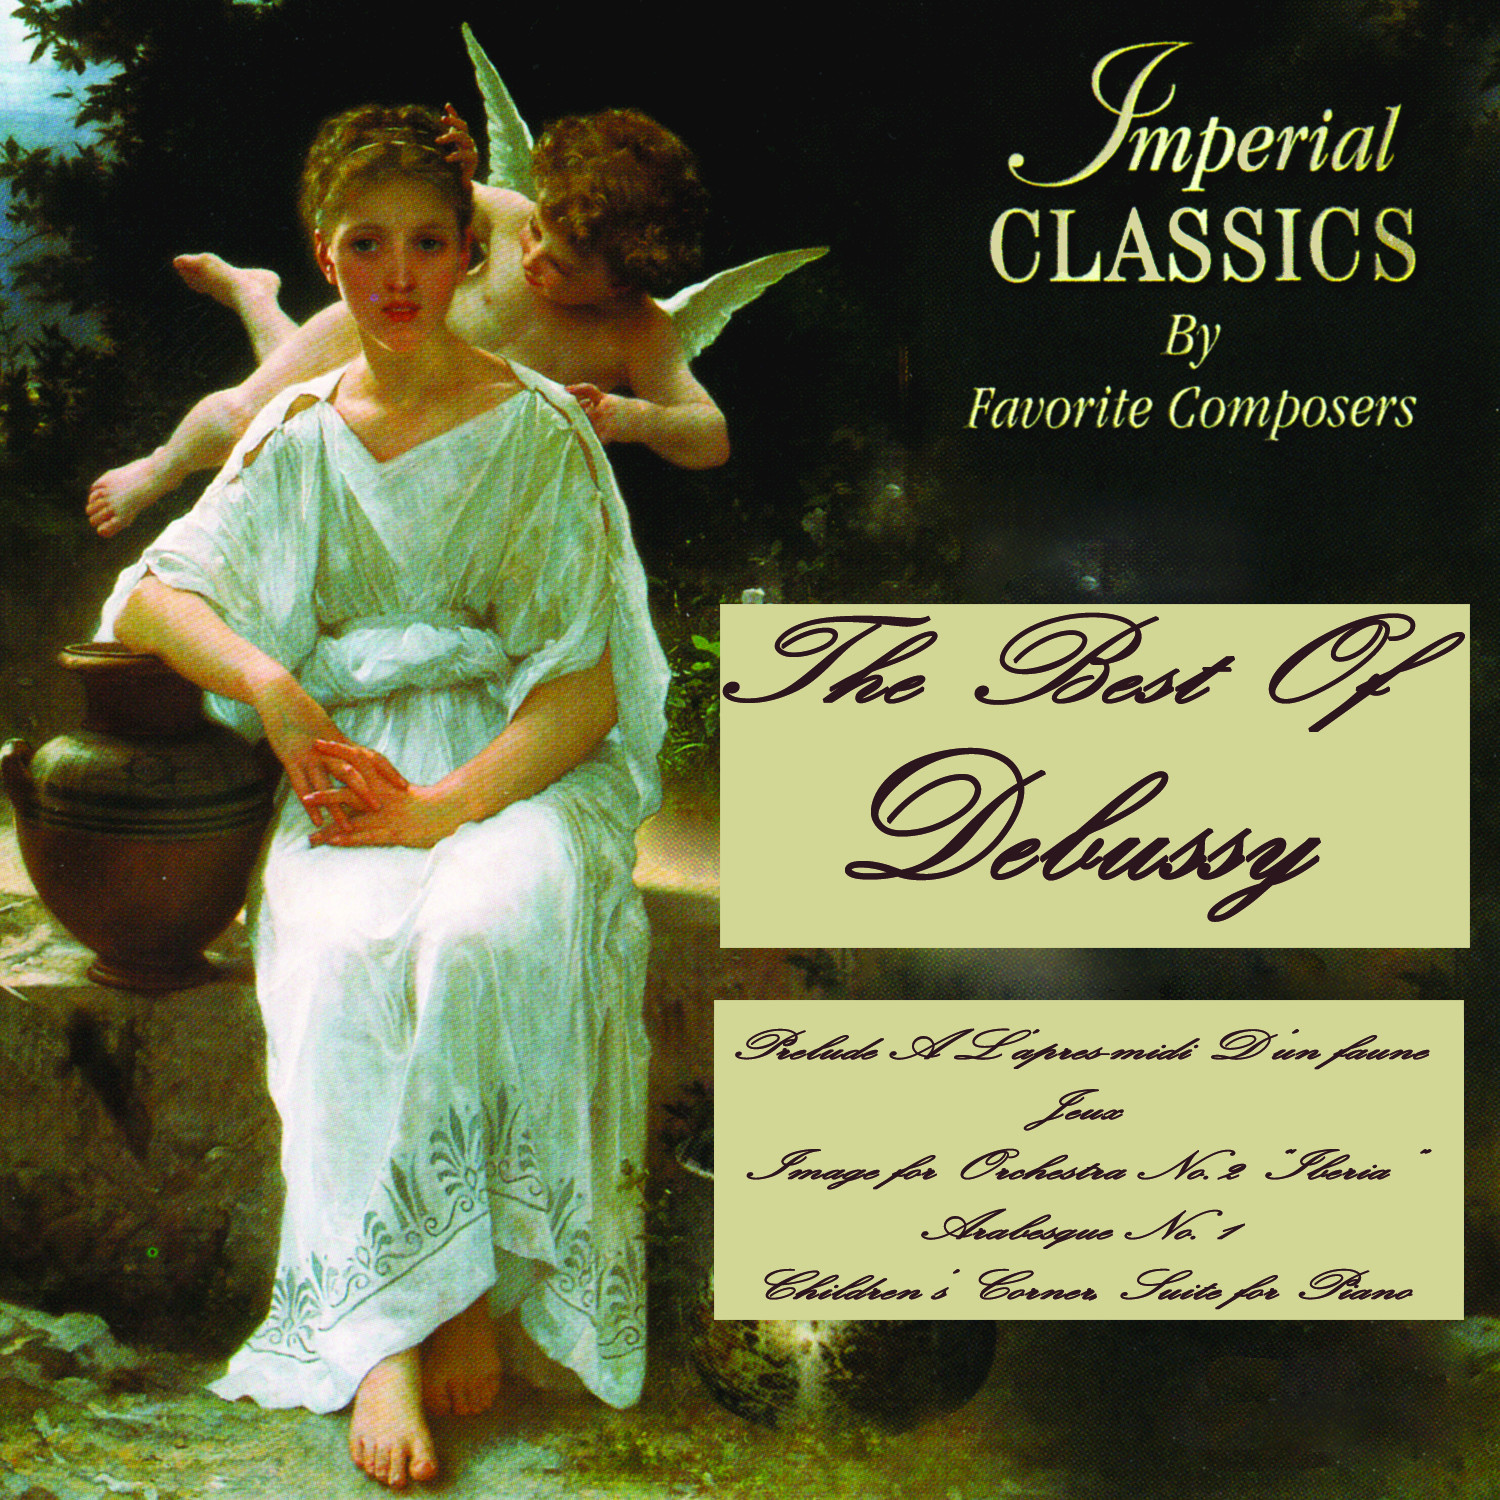 Imperial Classics: The Best Of Debussy